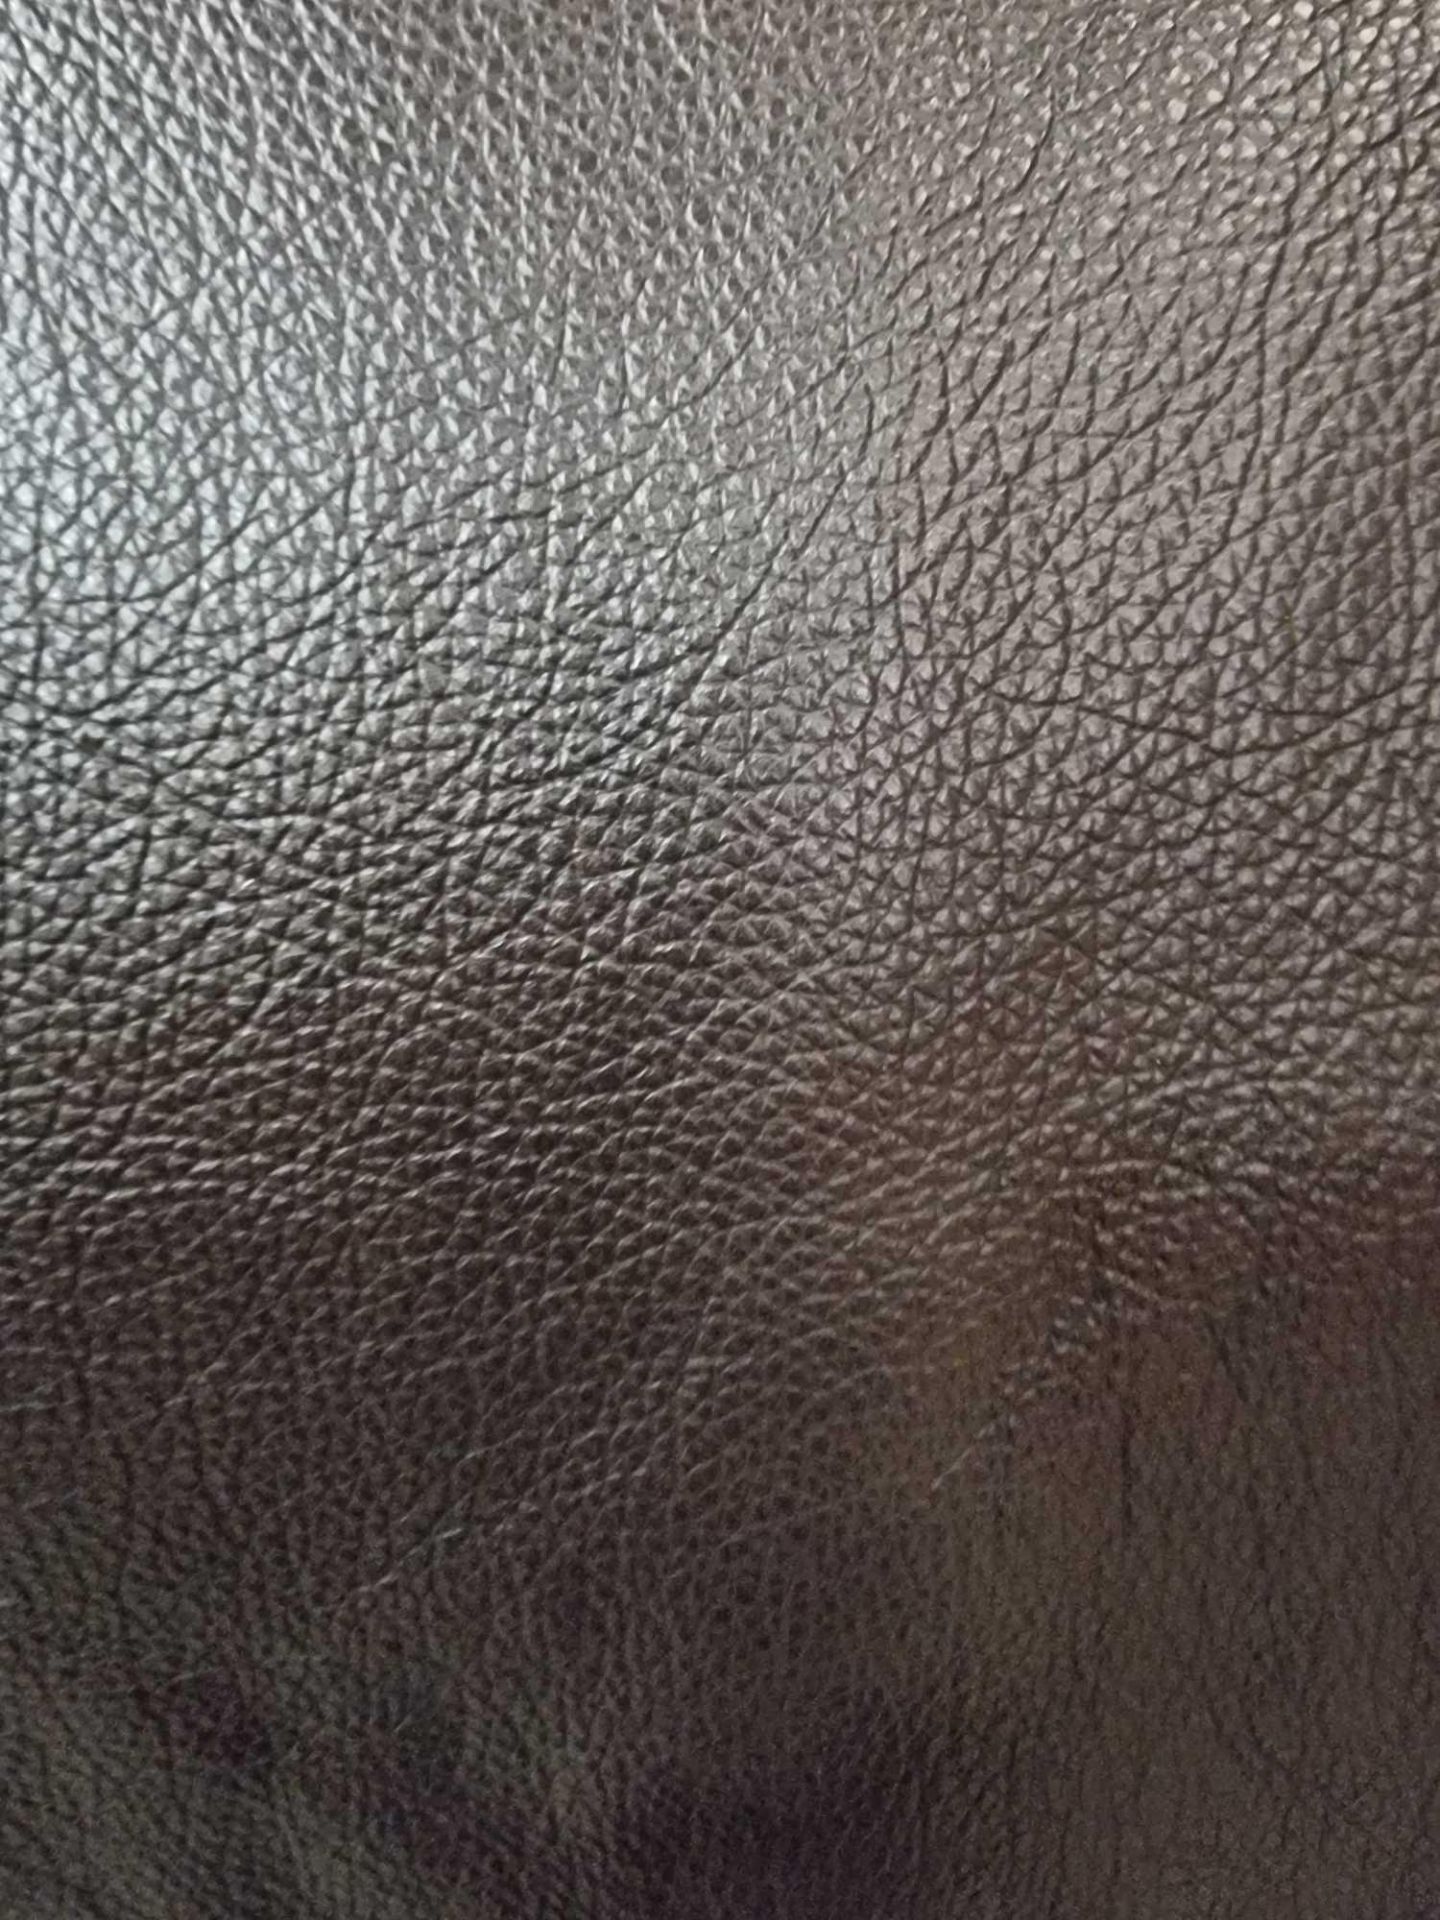 Mastrotto Hudson Chocolate Leather Hide approximately 4 2M2 2 1 x 2cm ( Hide No,119)